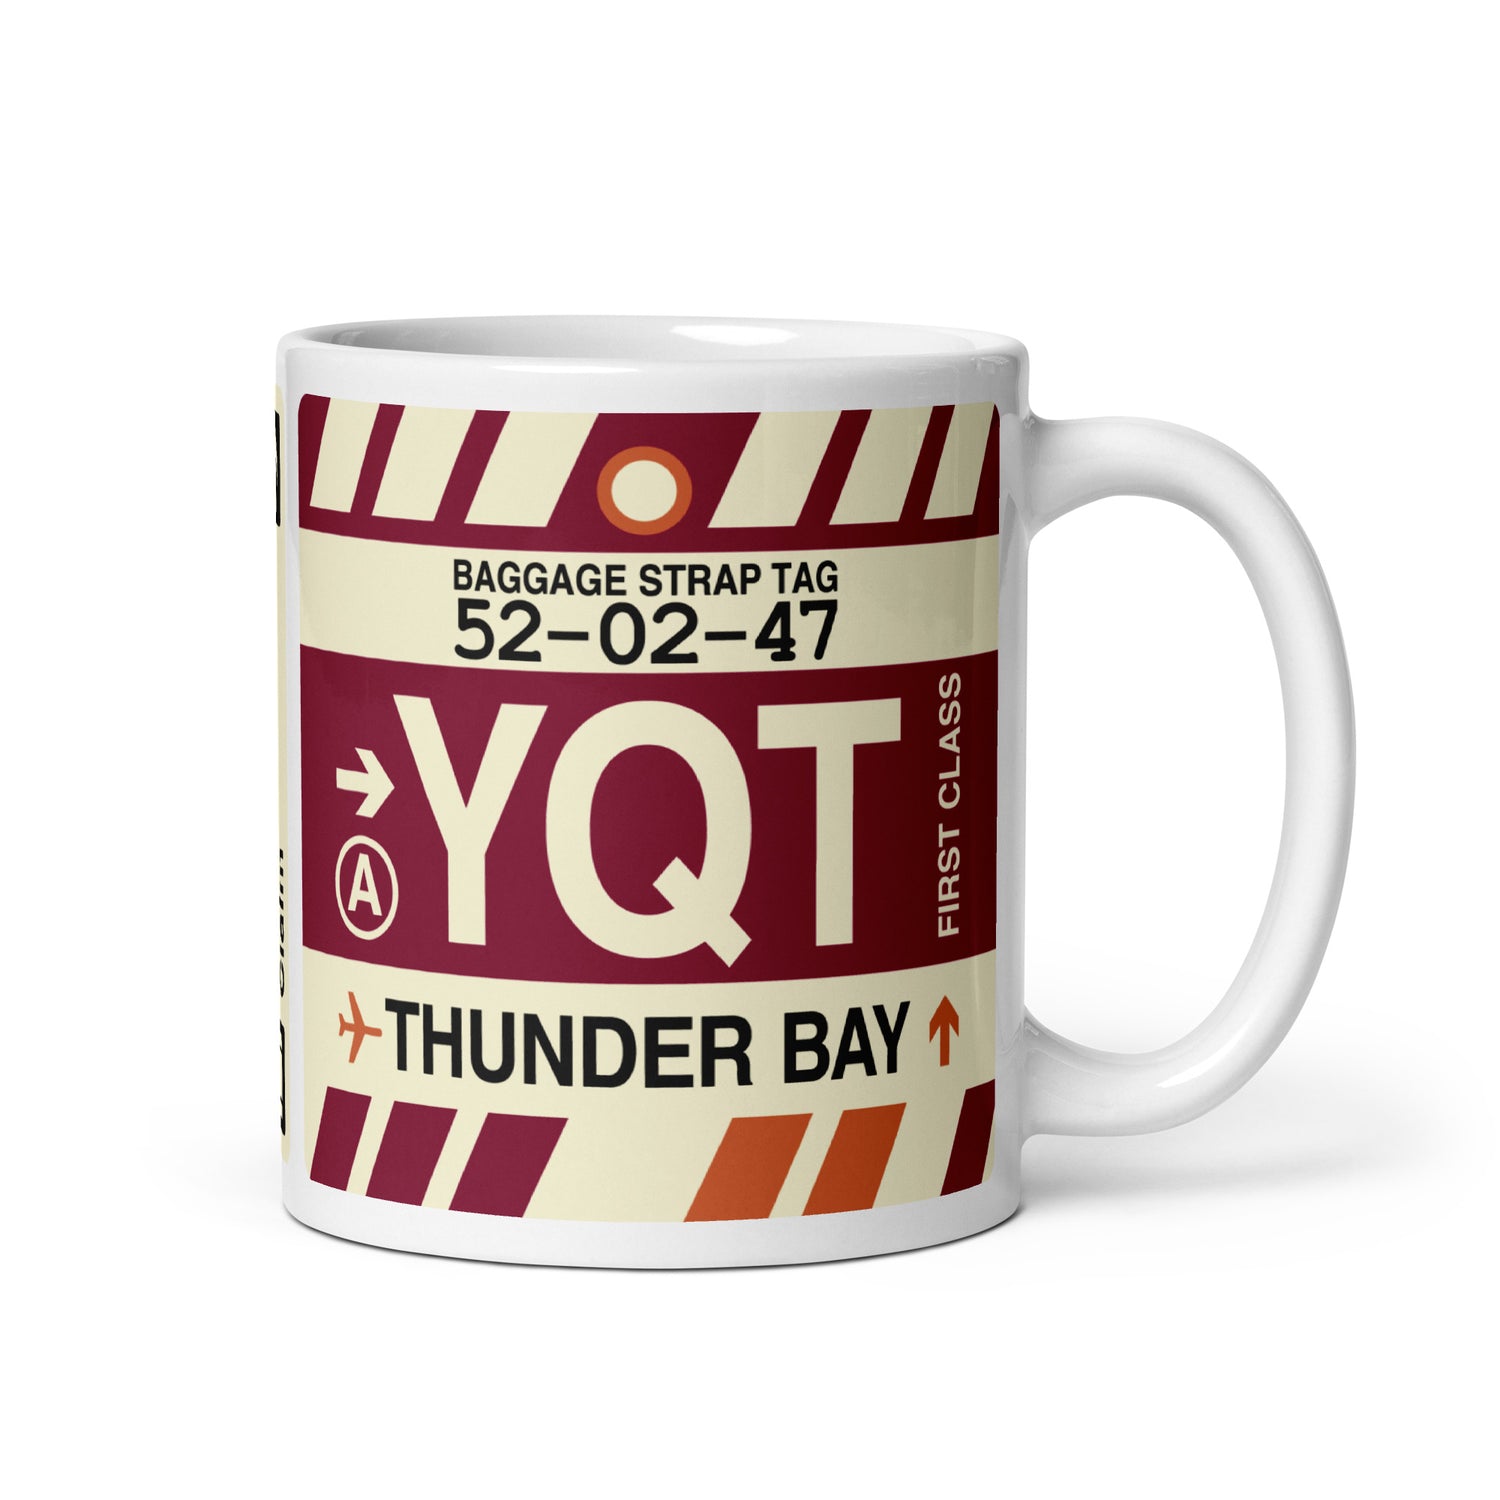 Thunder Bay Ontario Coffee Mugs and Water Bottles • YQT Airport Code